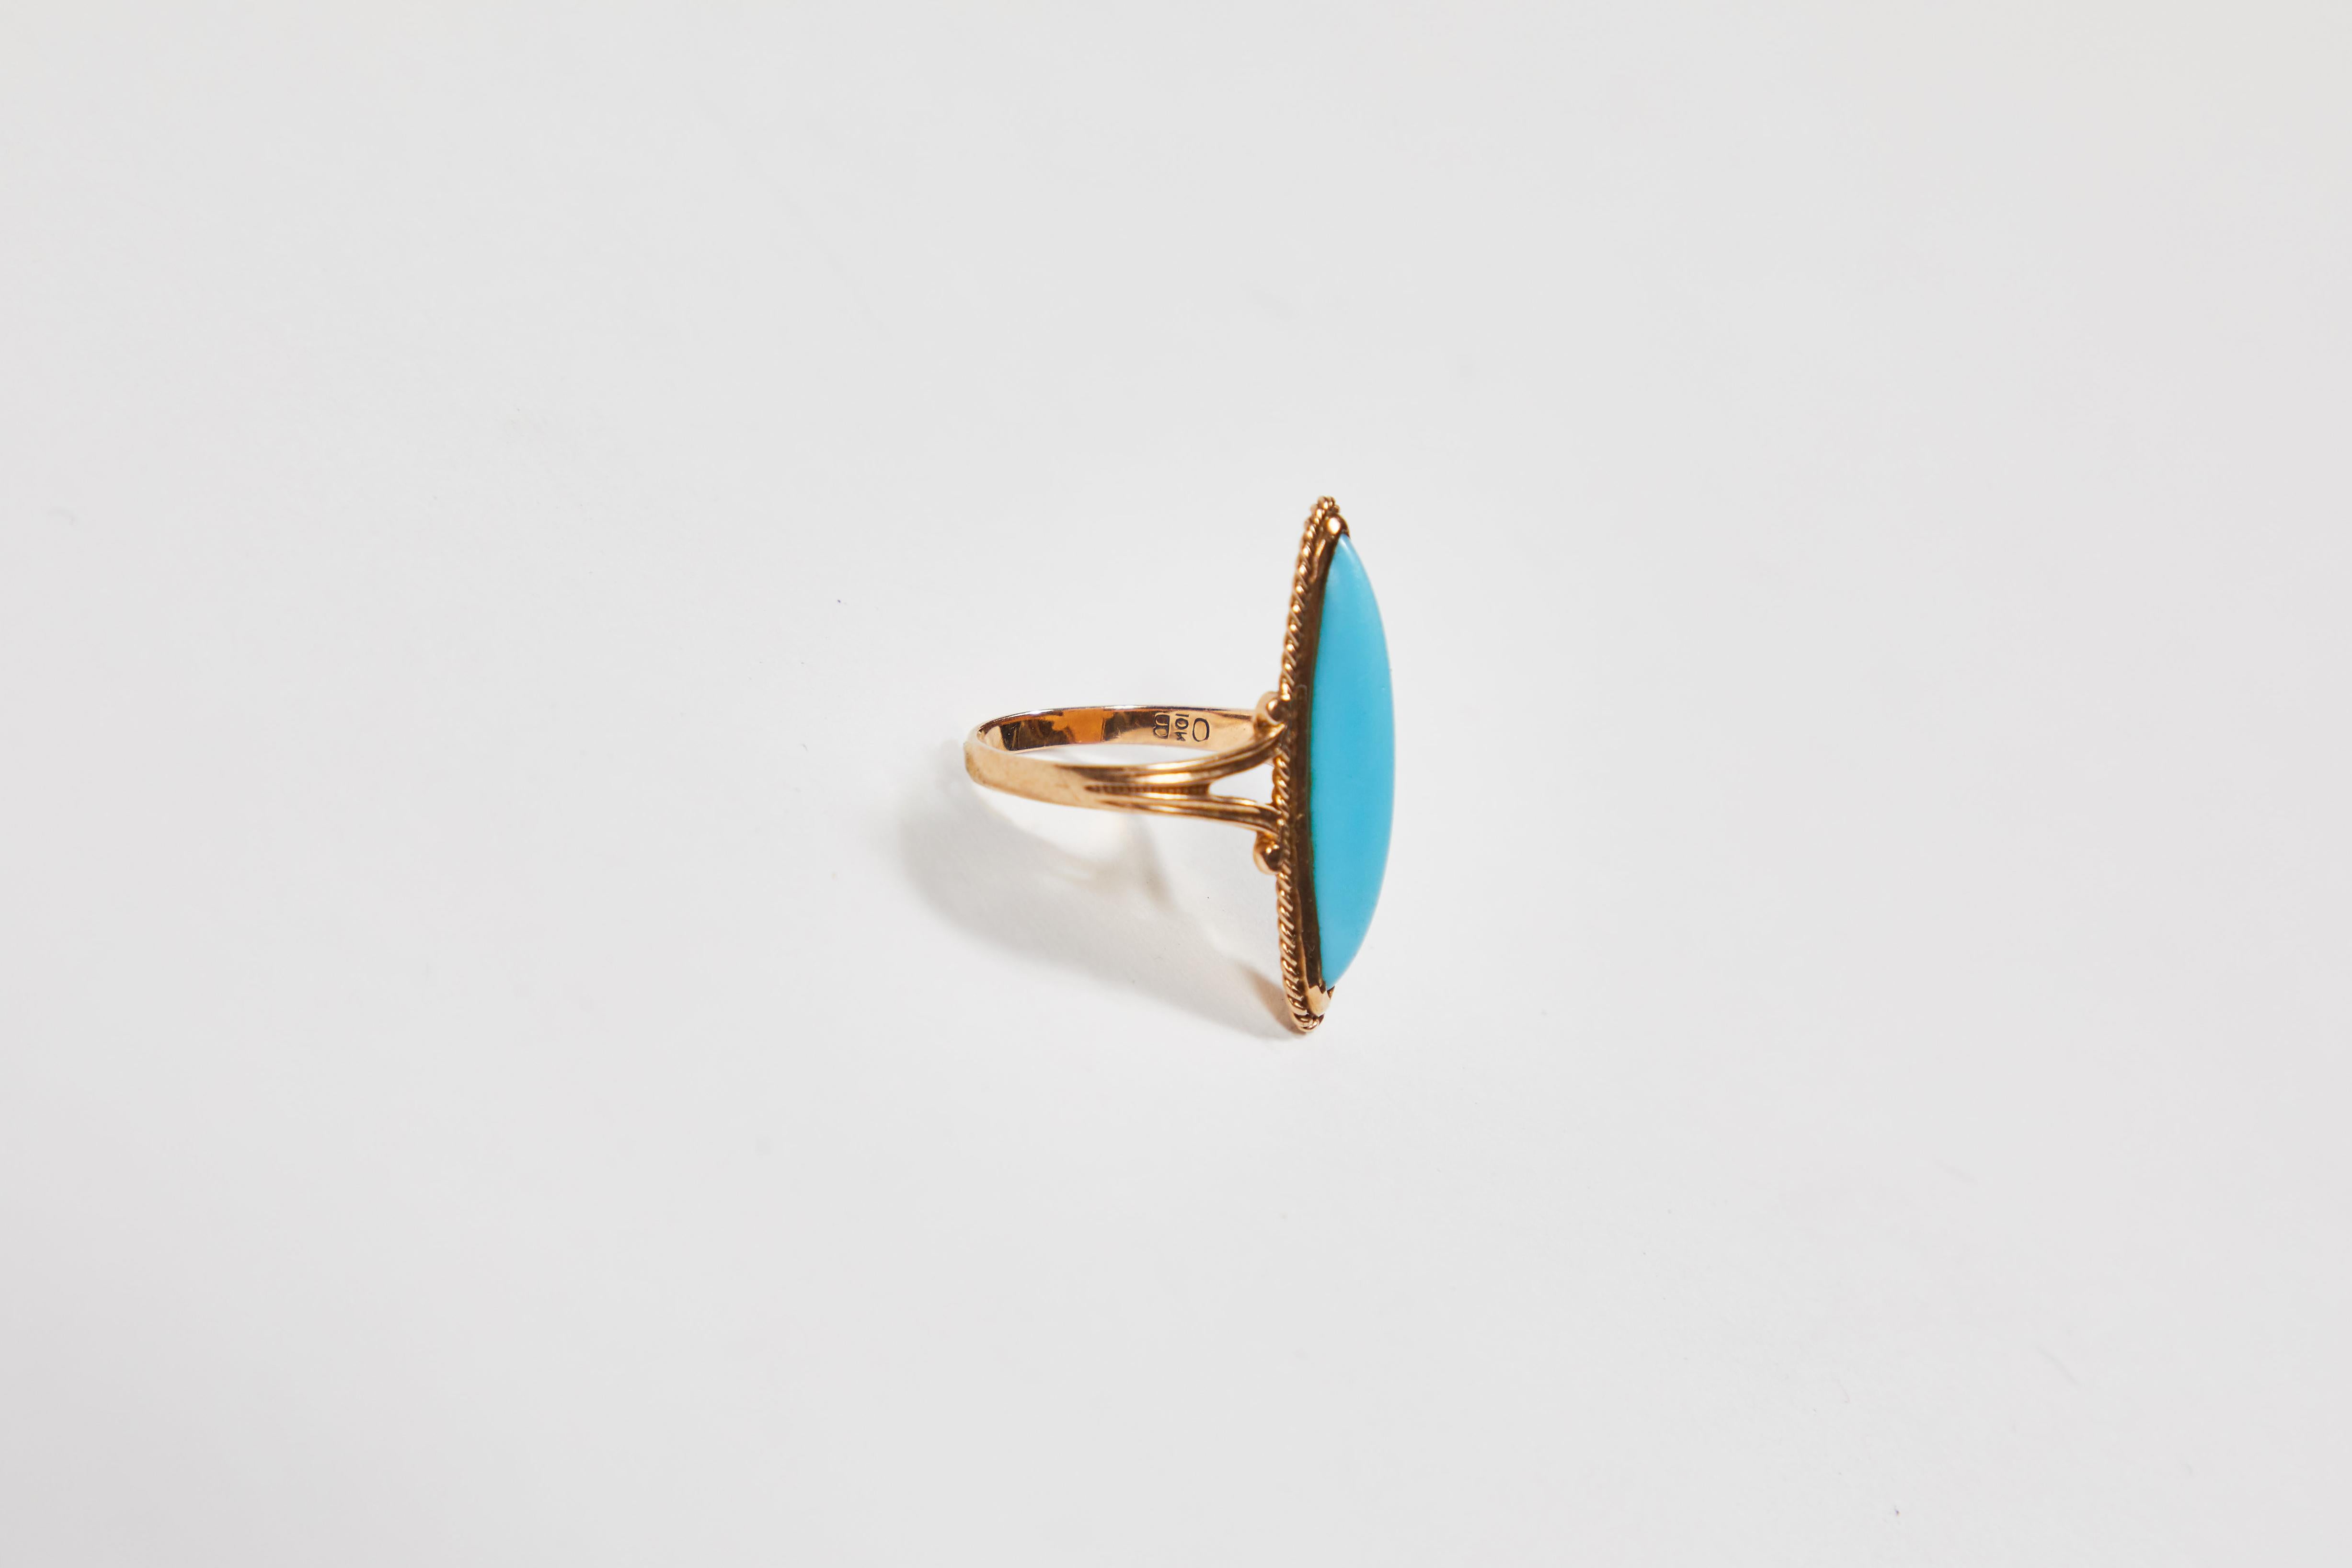 French Cut Victorian Persian Turquoise Petite Pinky Ring by Ostby & Barton in 10 Karat Gold